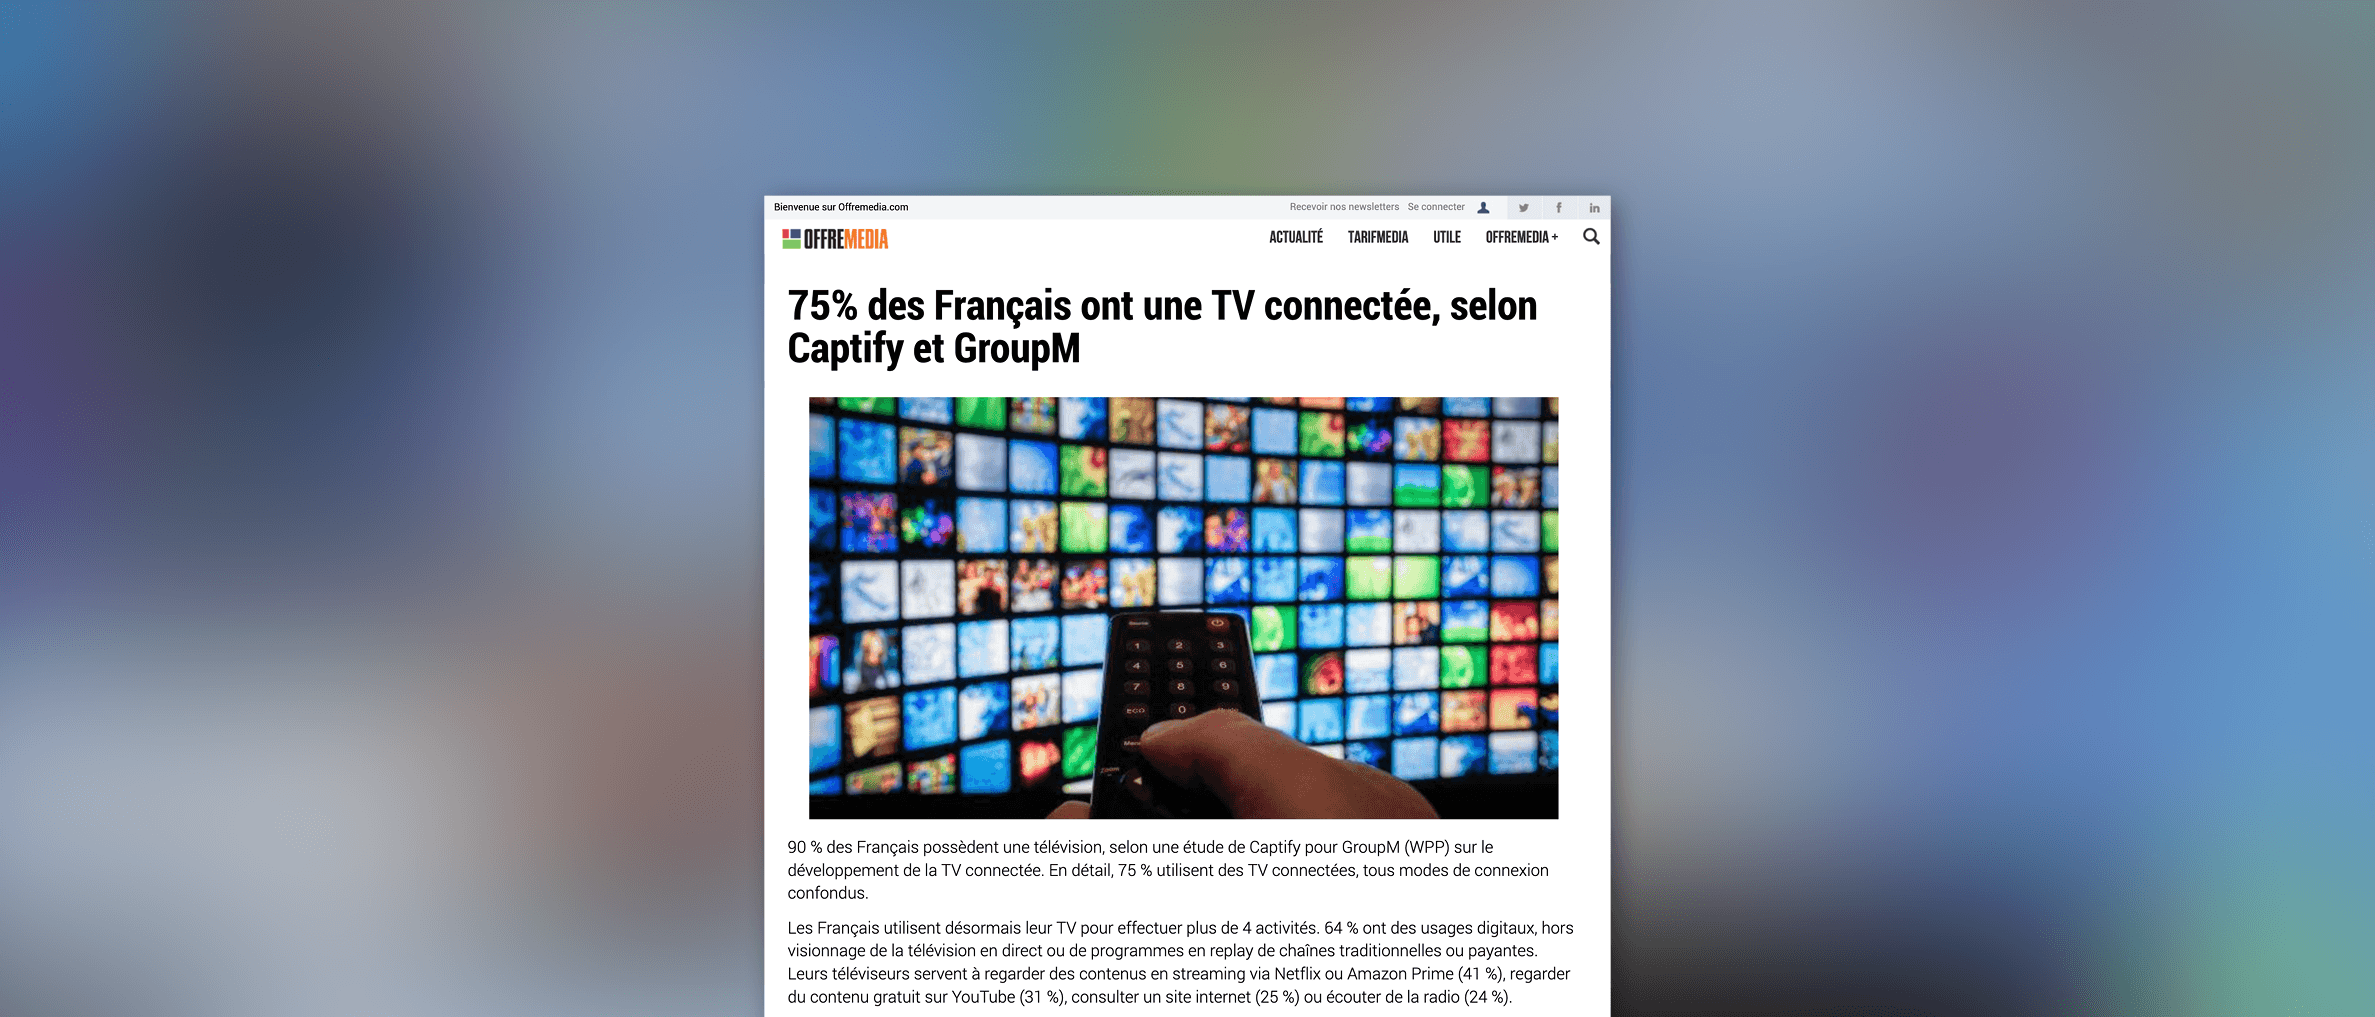 Offre Media: 75% of French People Have a Connected TV, according to research from GroupM and Captify